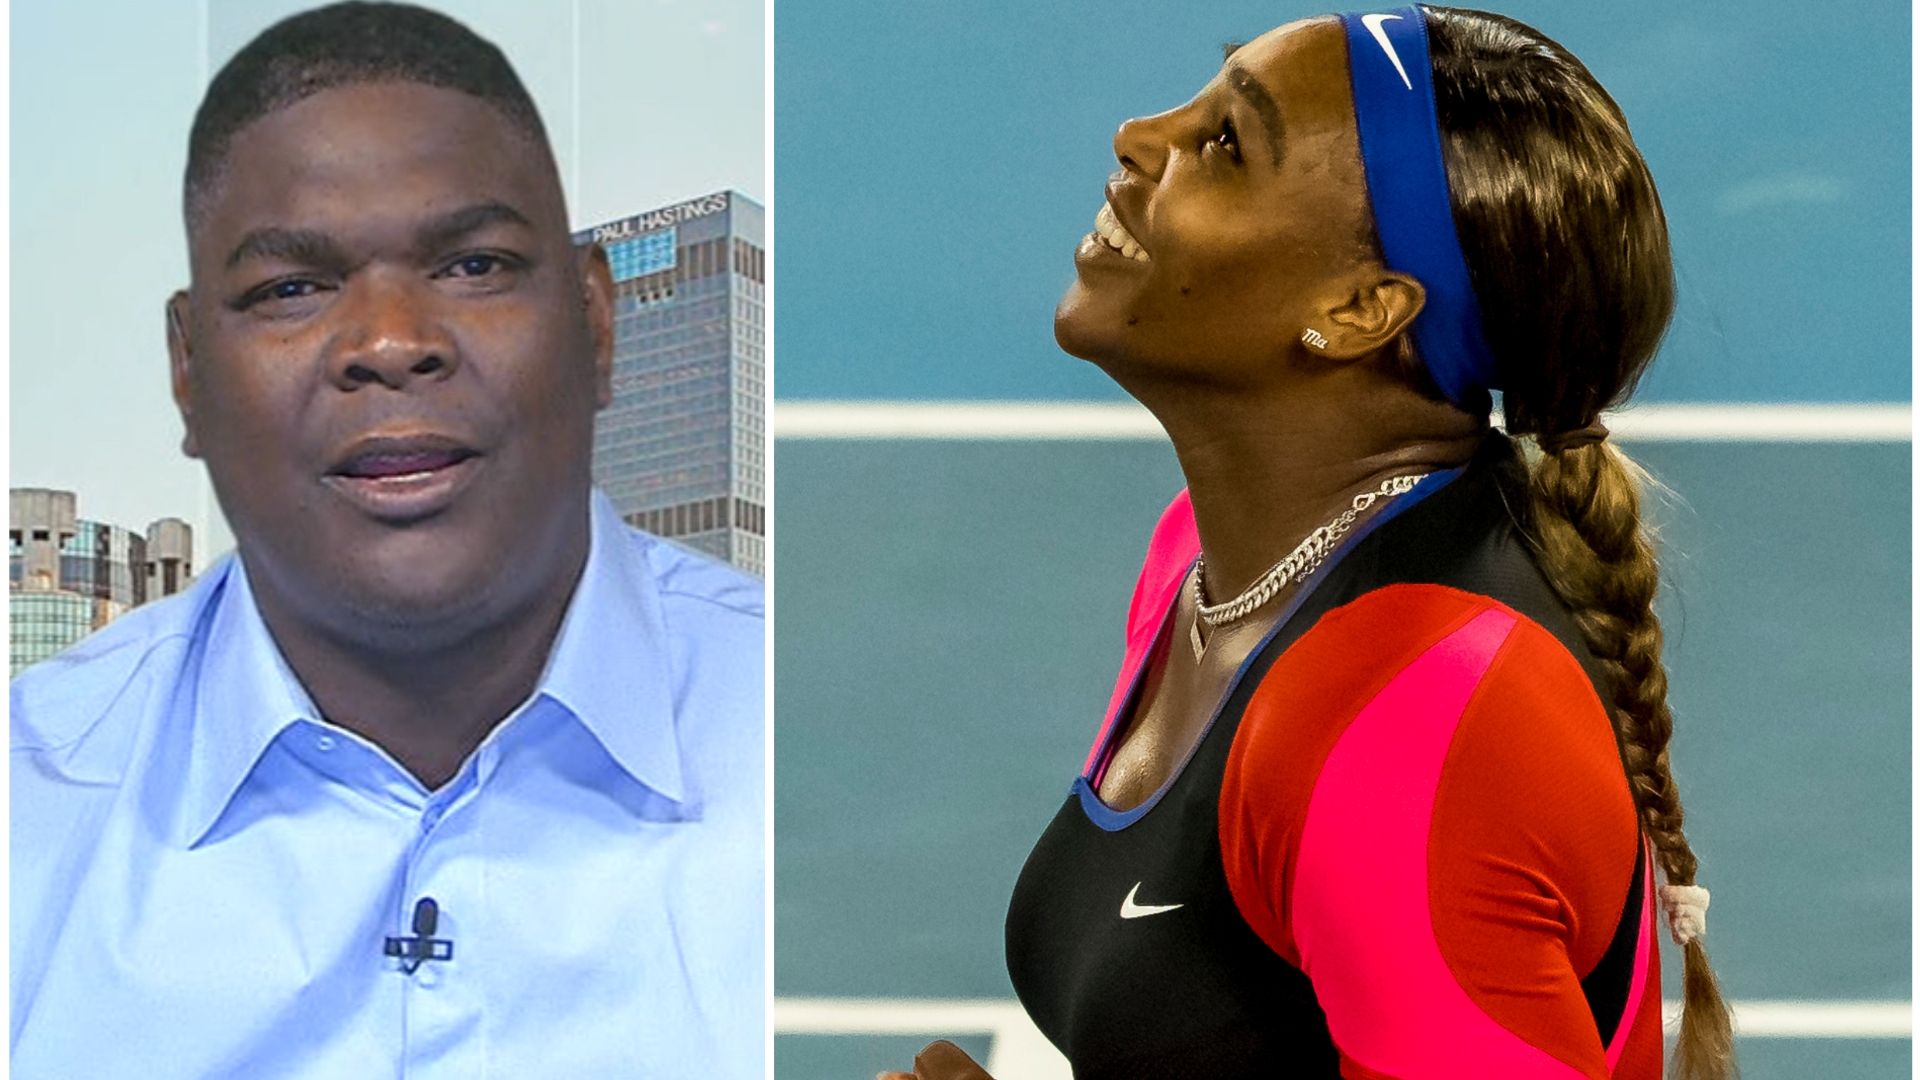 Keyshawn: Serena is the greatest female athlete of all time